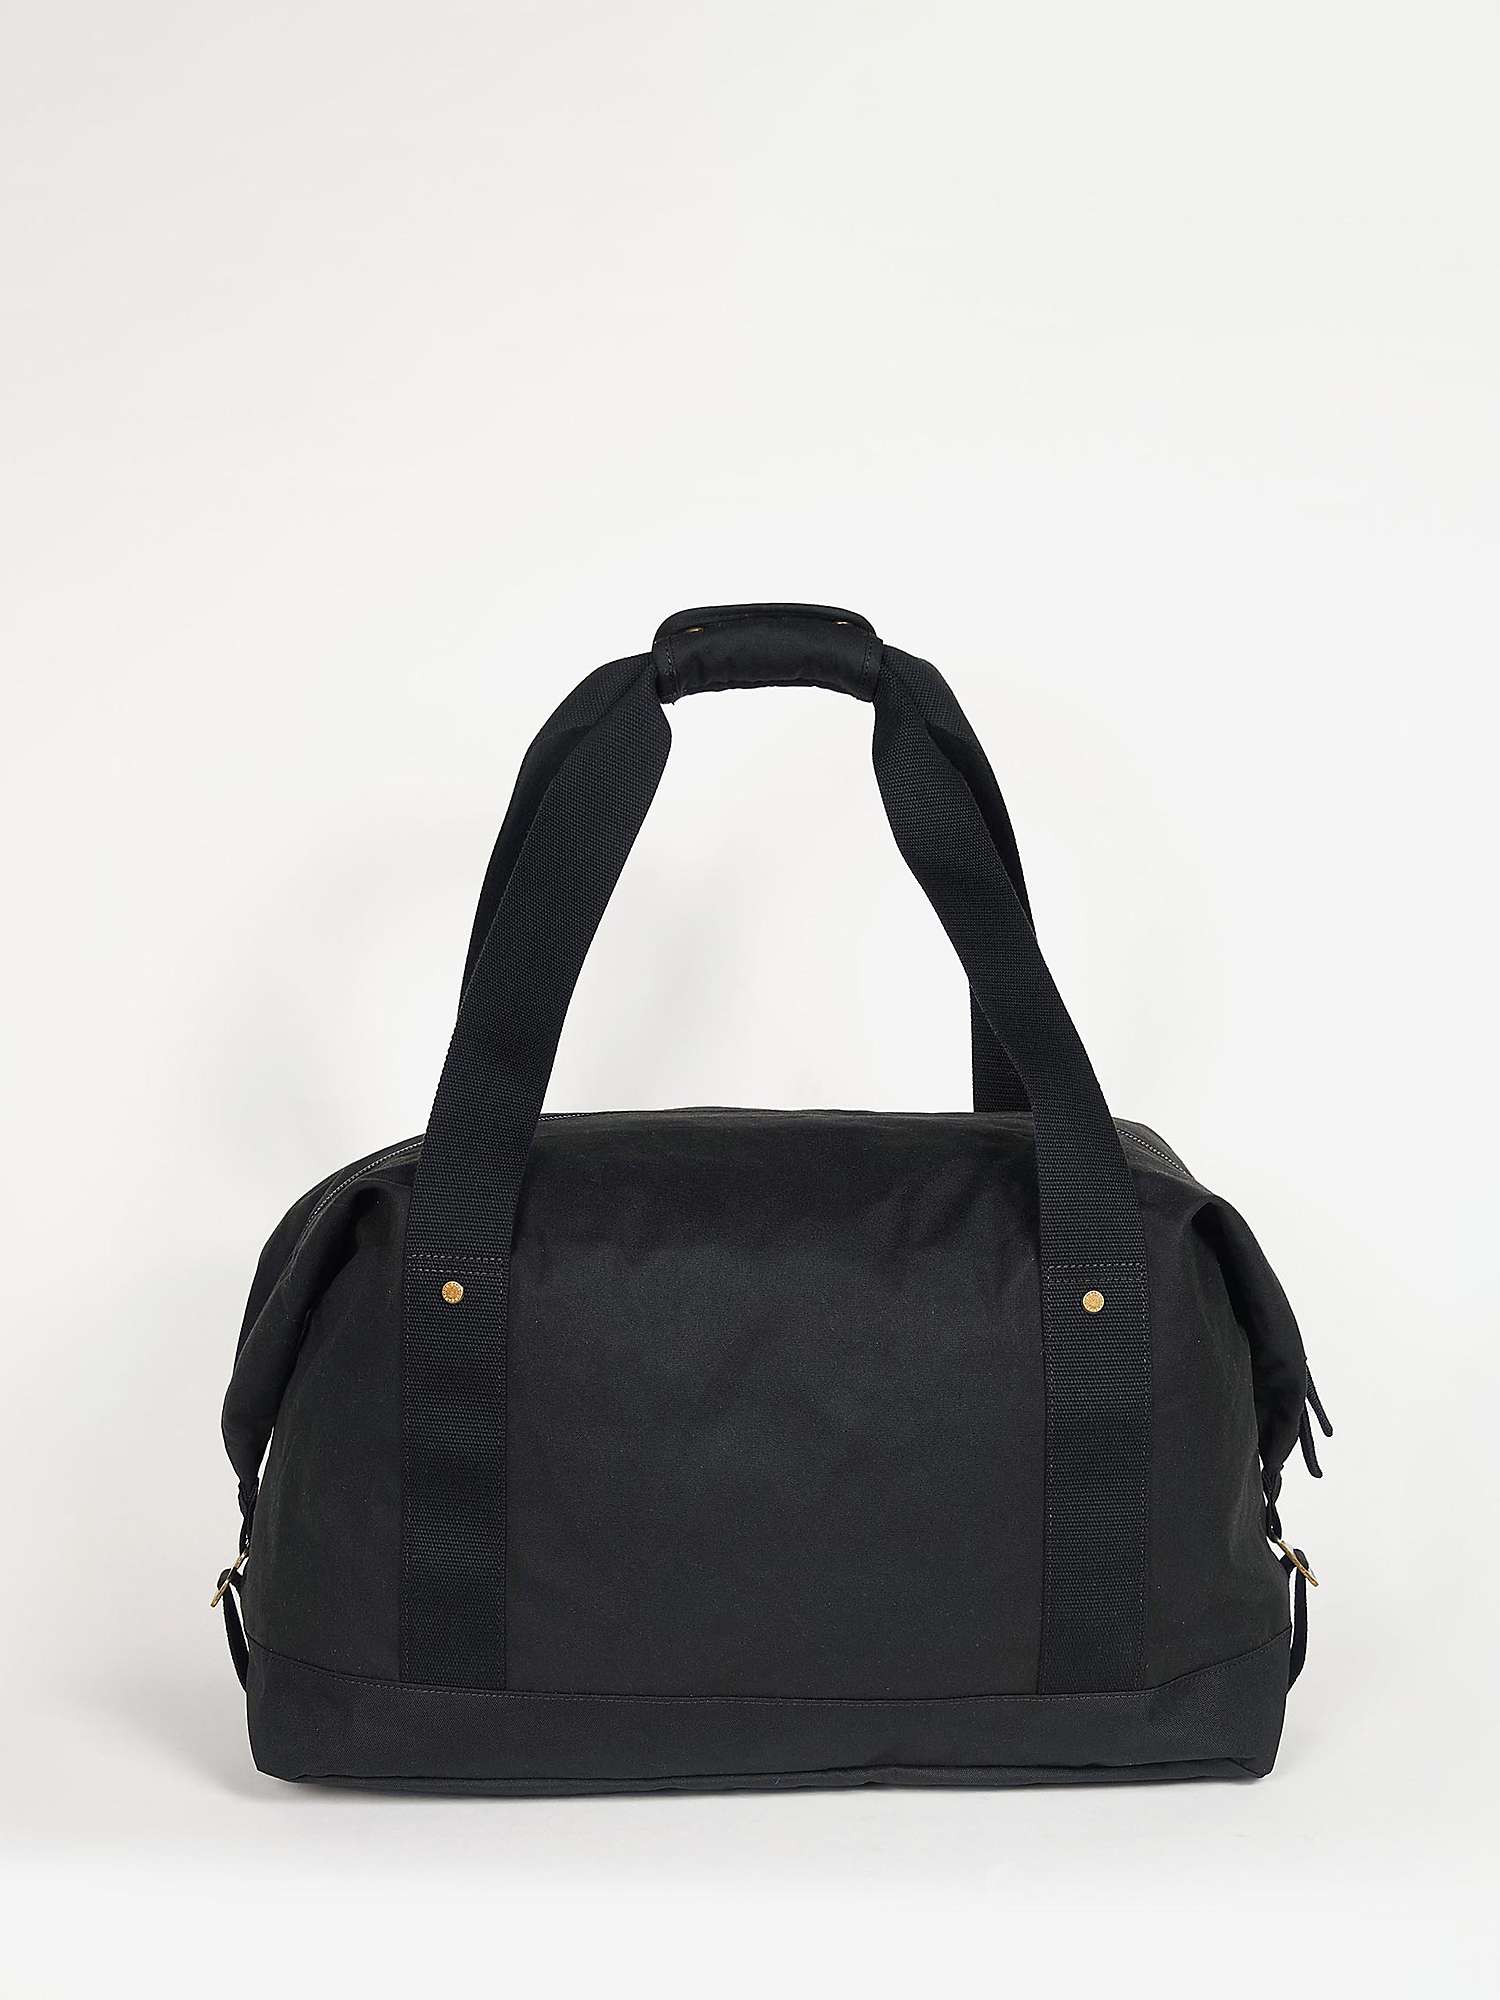 Buy Barbour Essential Waxed Cotton Holdall Online at johnlewis.com